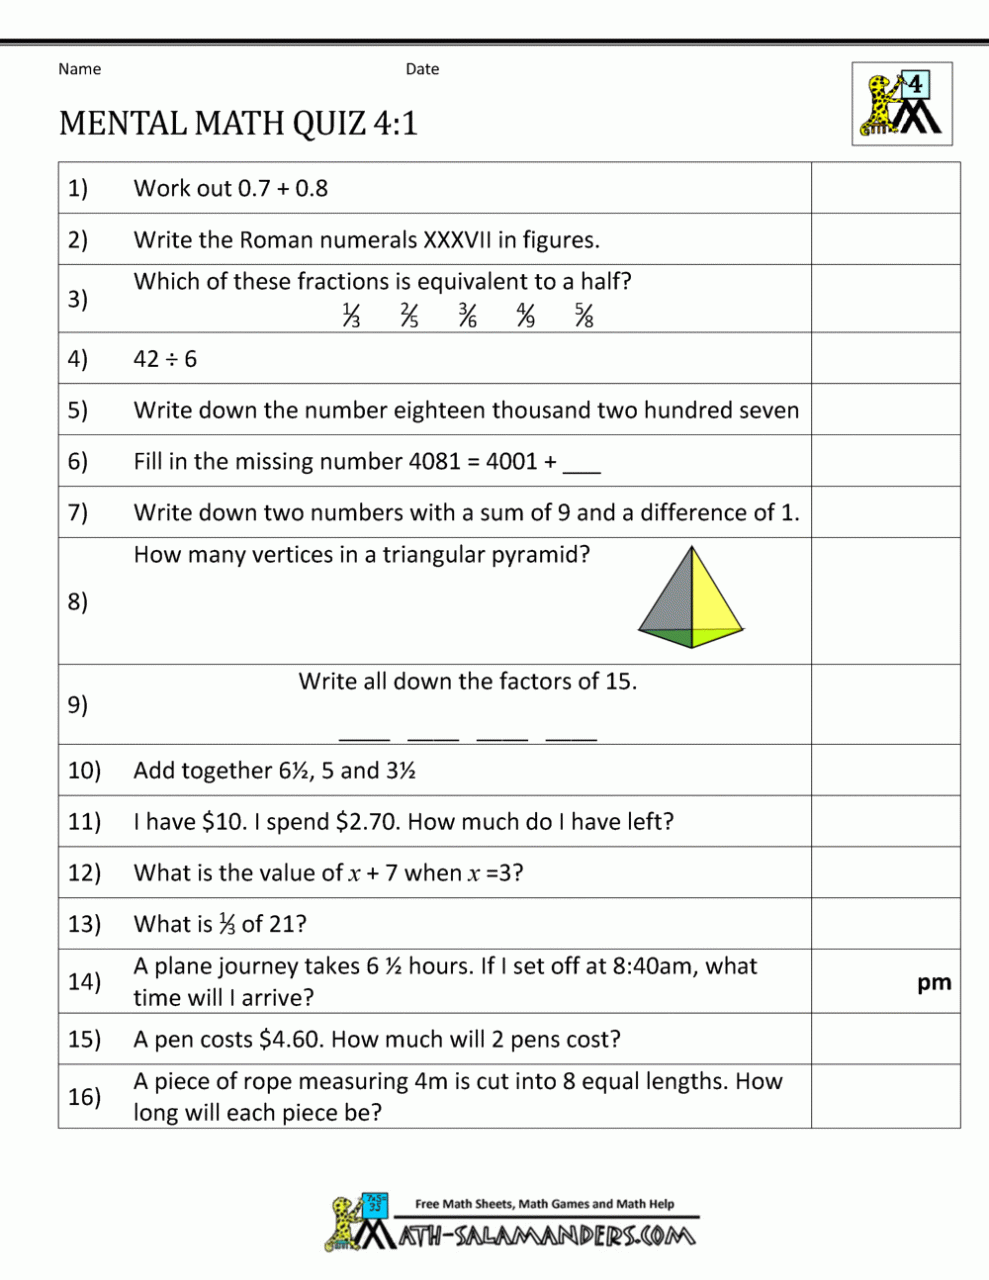 Division Worksheet For Class 4 Cbse Awesome Worksheet